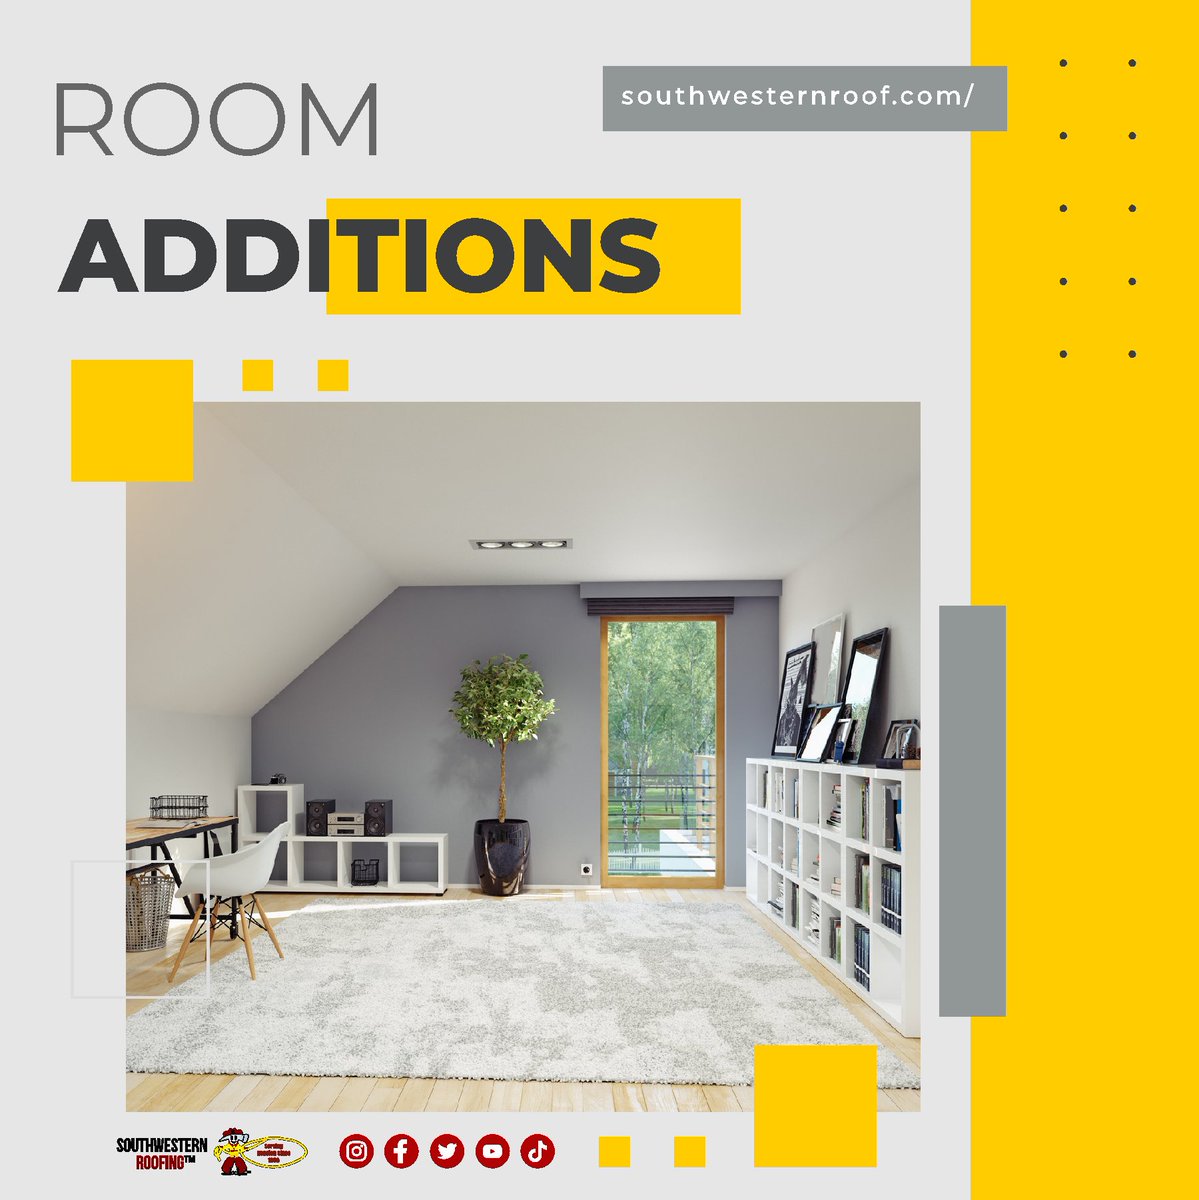 If you want an additional room in your home, attic is the first place to look for. 

#southwesternroofing #room #RoomAdditions #home #texas #roofing #business #houston #followus #home #roofer #houstonbusiness #contractor #ResidentialRoom 

🔨 #room #additions in #Houston 🔨 
 ...